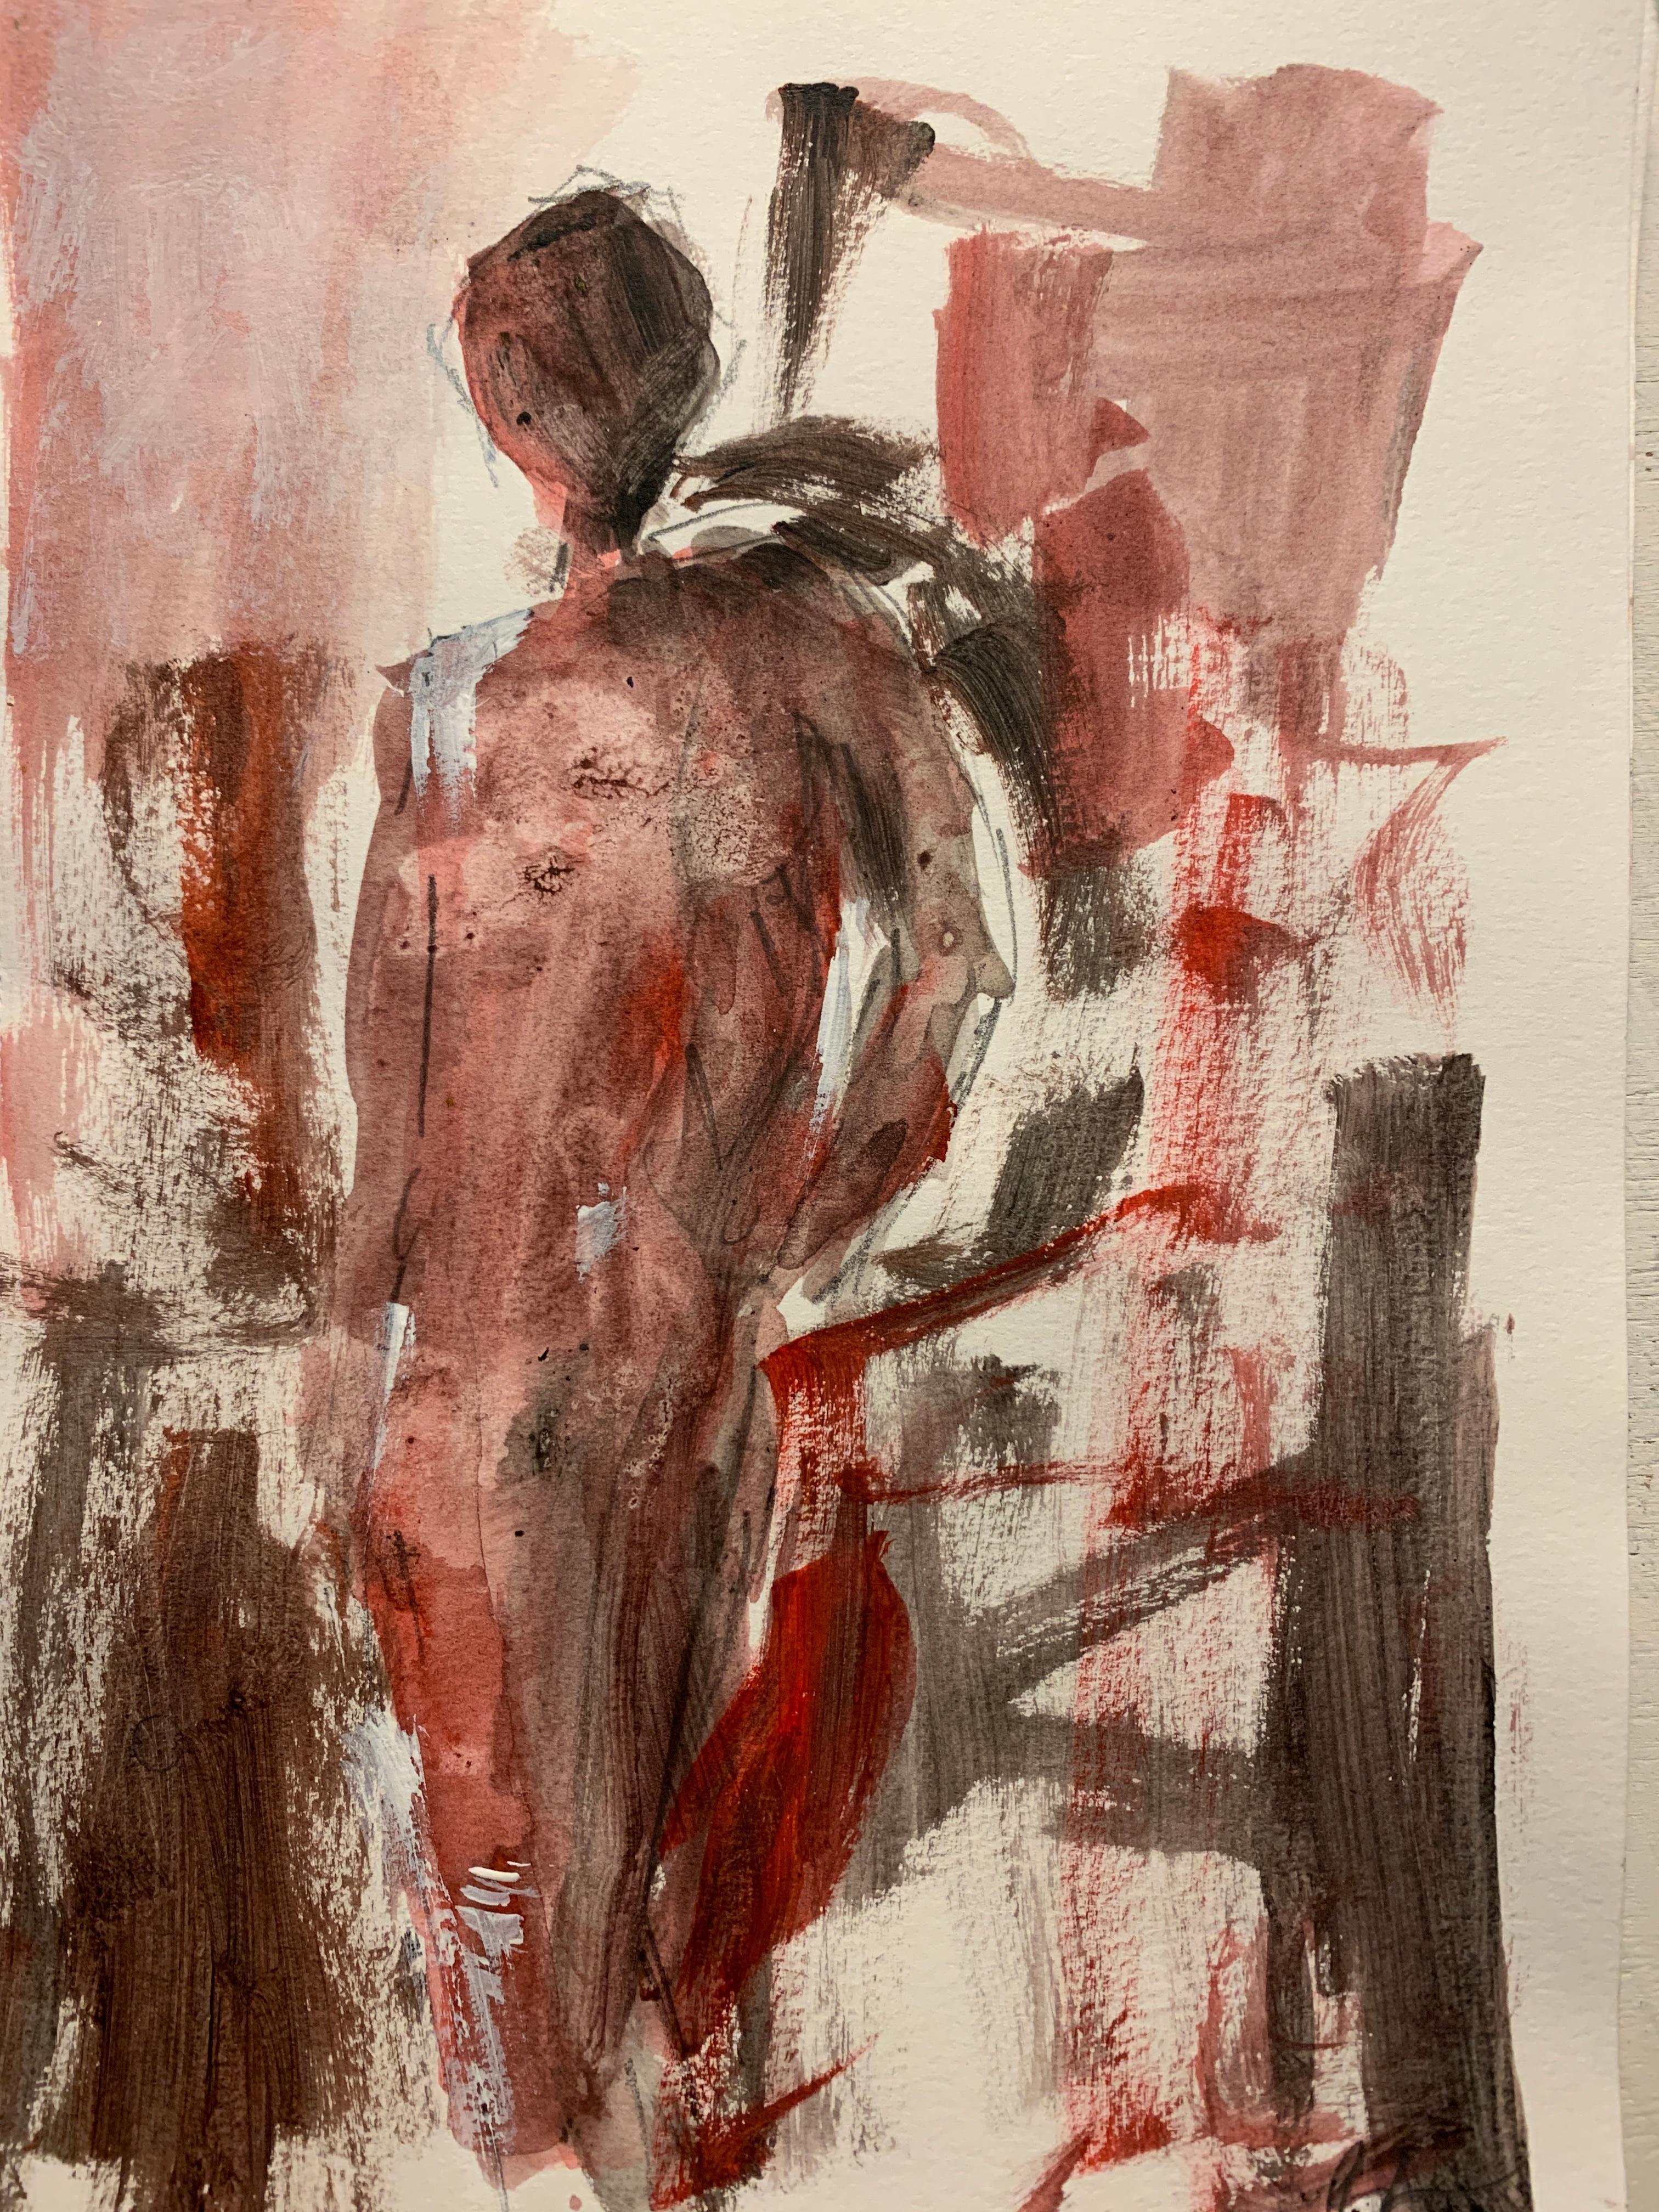 Bertha Long Figurative Painting - English abstract 20th century oil sketch of a figure in Red, Black and White